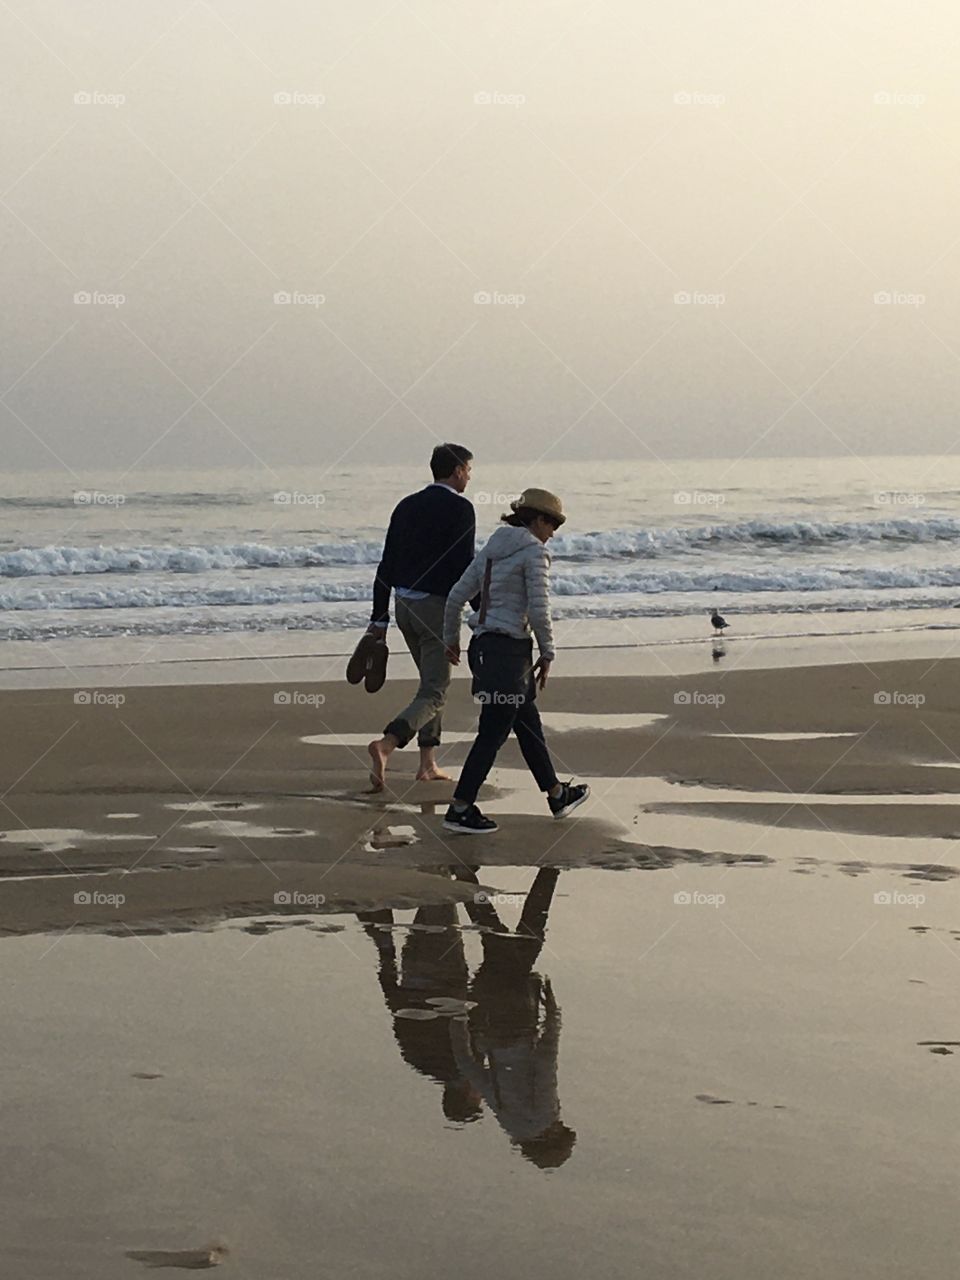 A couple walking together in the evening light